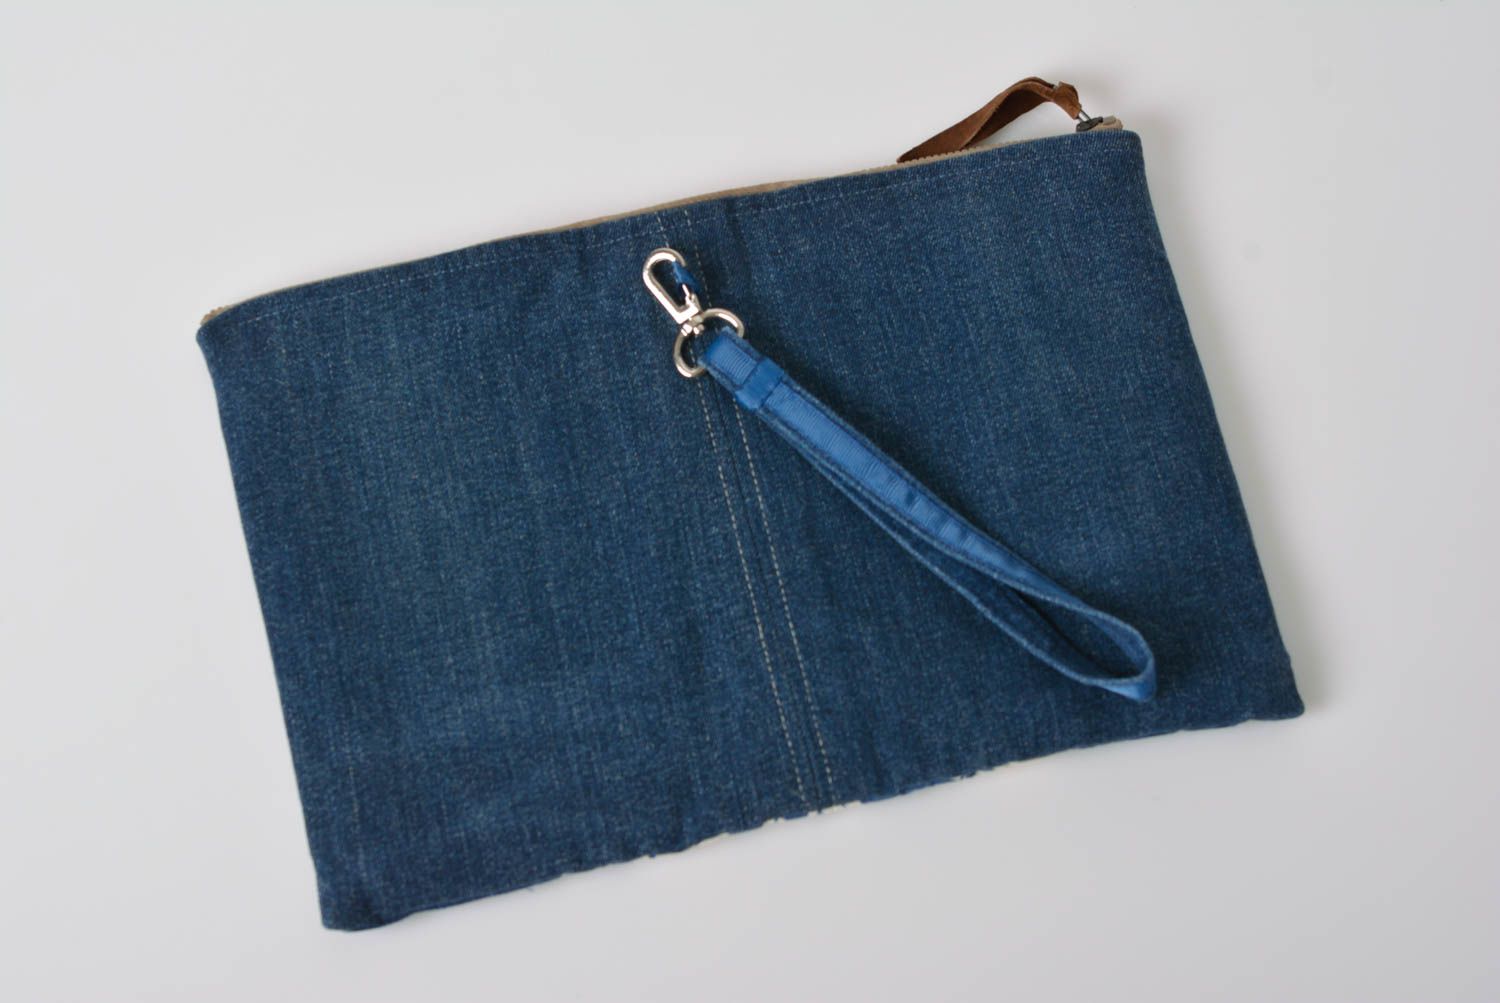 Handmade stylish clutch bag made of denim and cotton with zipper and loop photo 4